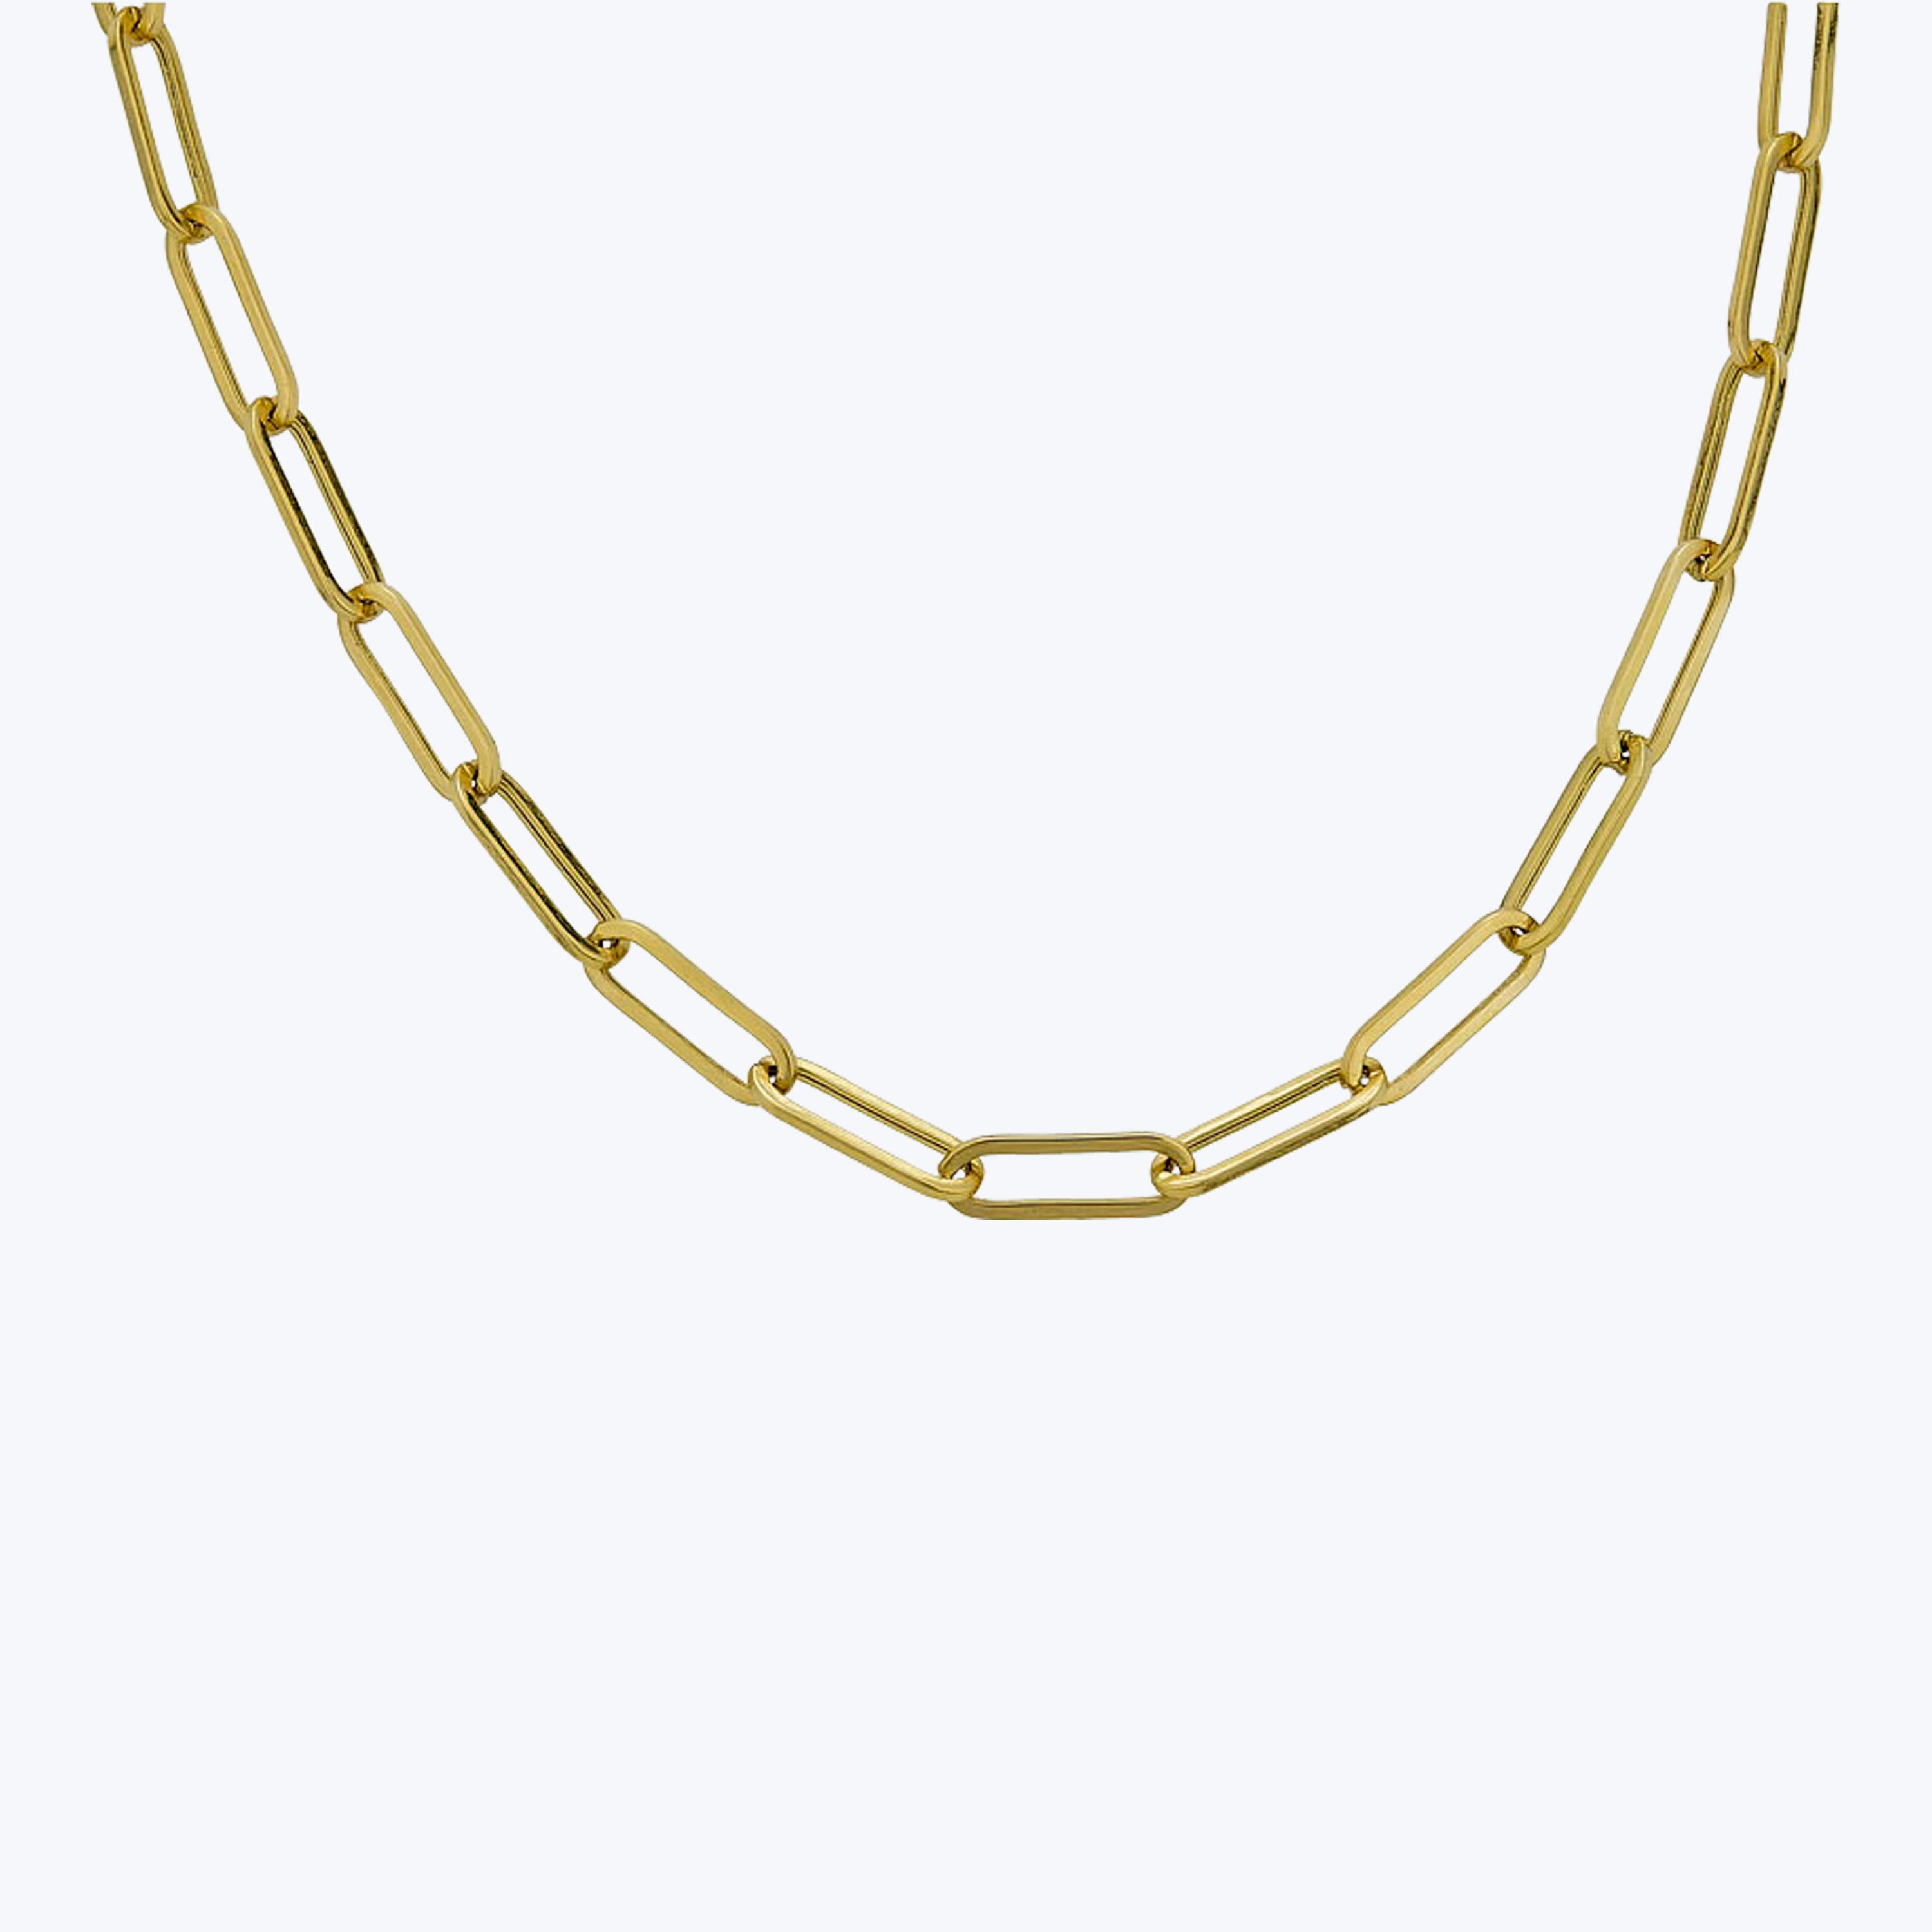 14K Yellow Gold Paper Clip With Charm Clasp Necklace 24"